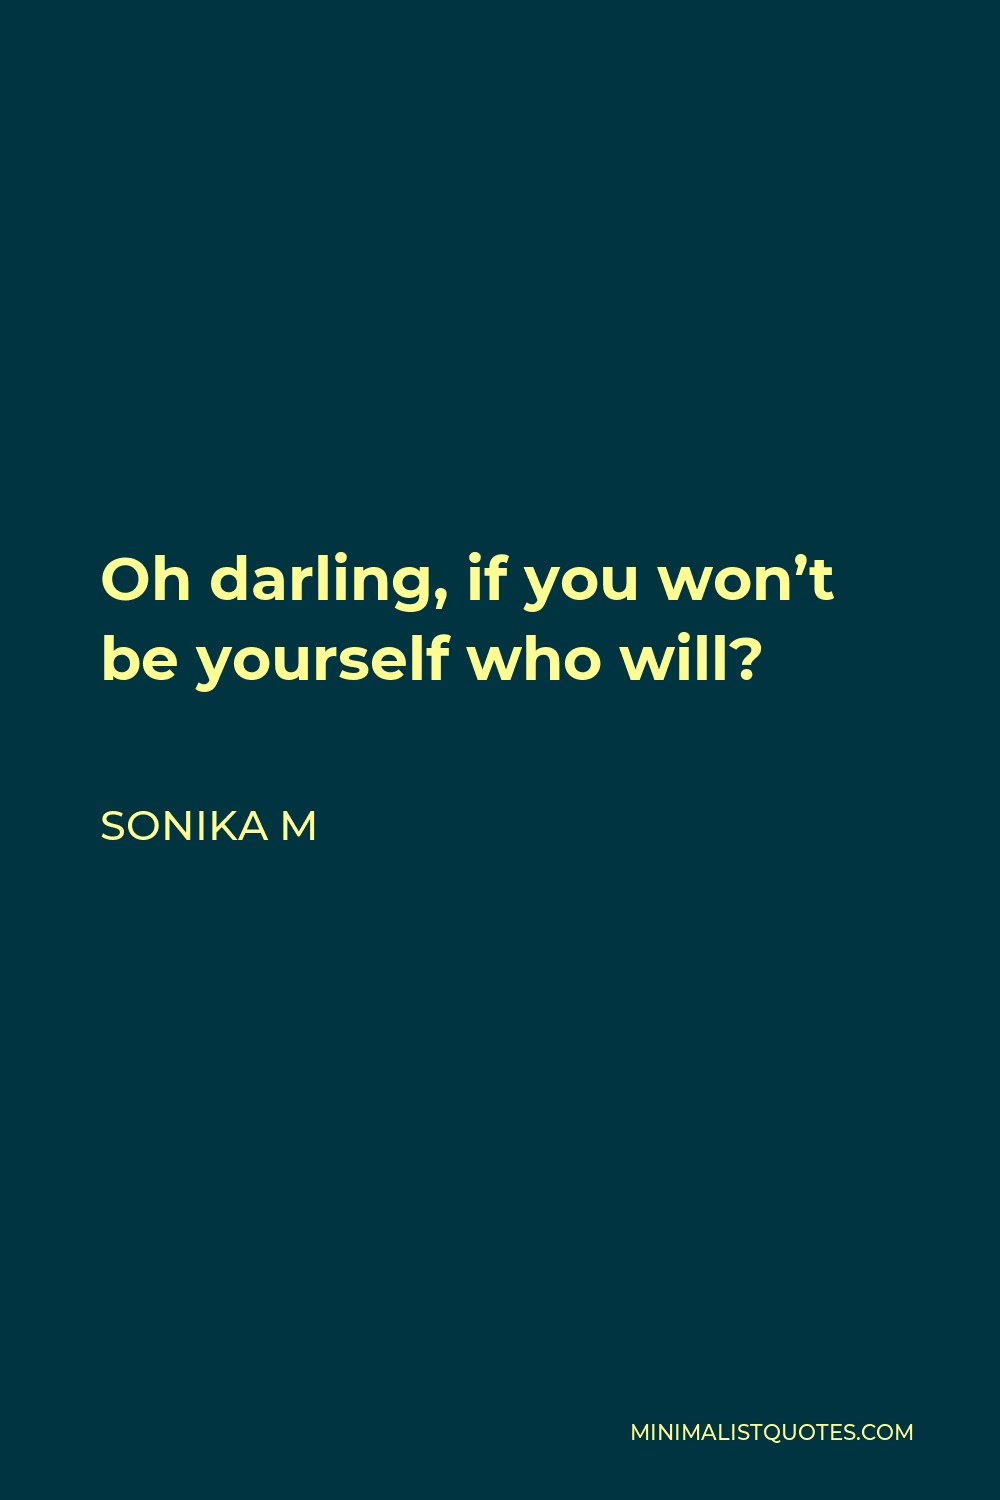 Sonika M Quote - Oh darling, if you won’t be yourself who will?